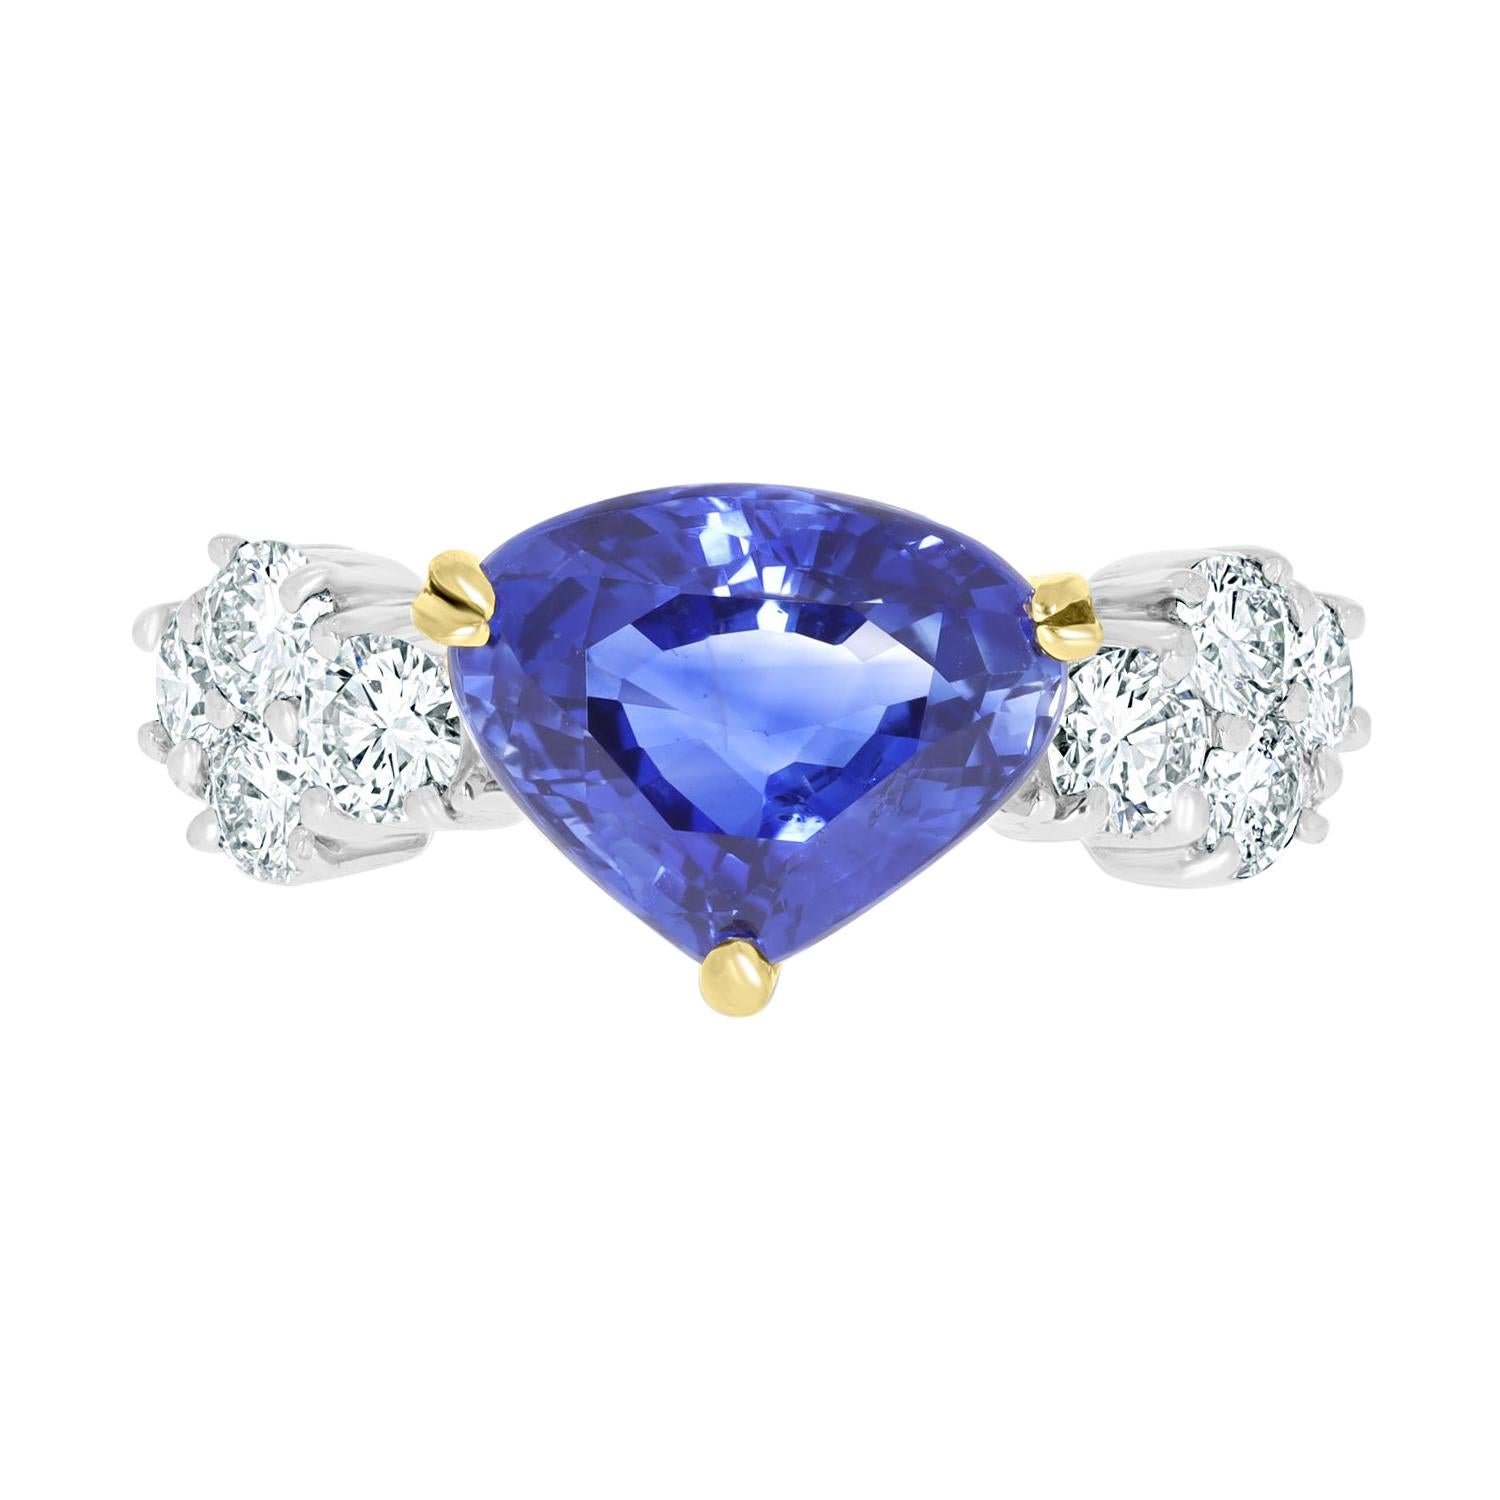 4.07ct Sapphire Ring with 0.82ct Diamonds Set in Platinum/18k For Sale